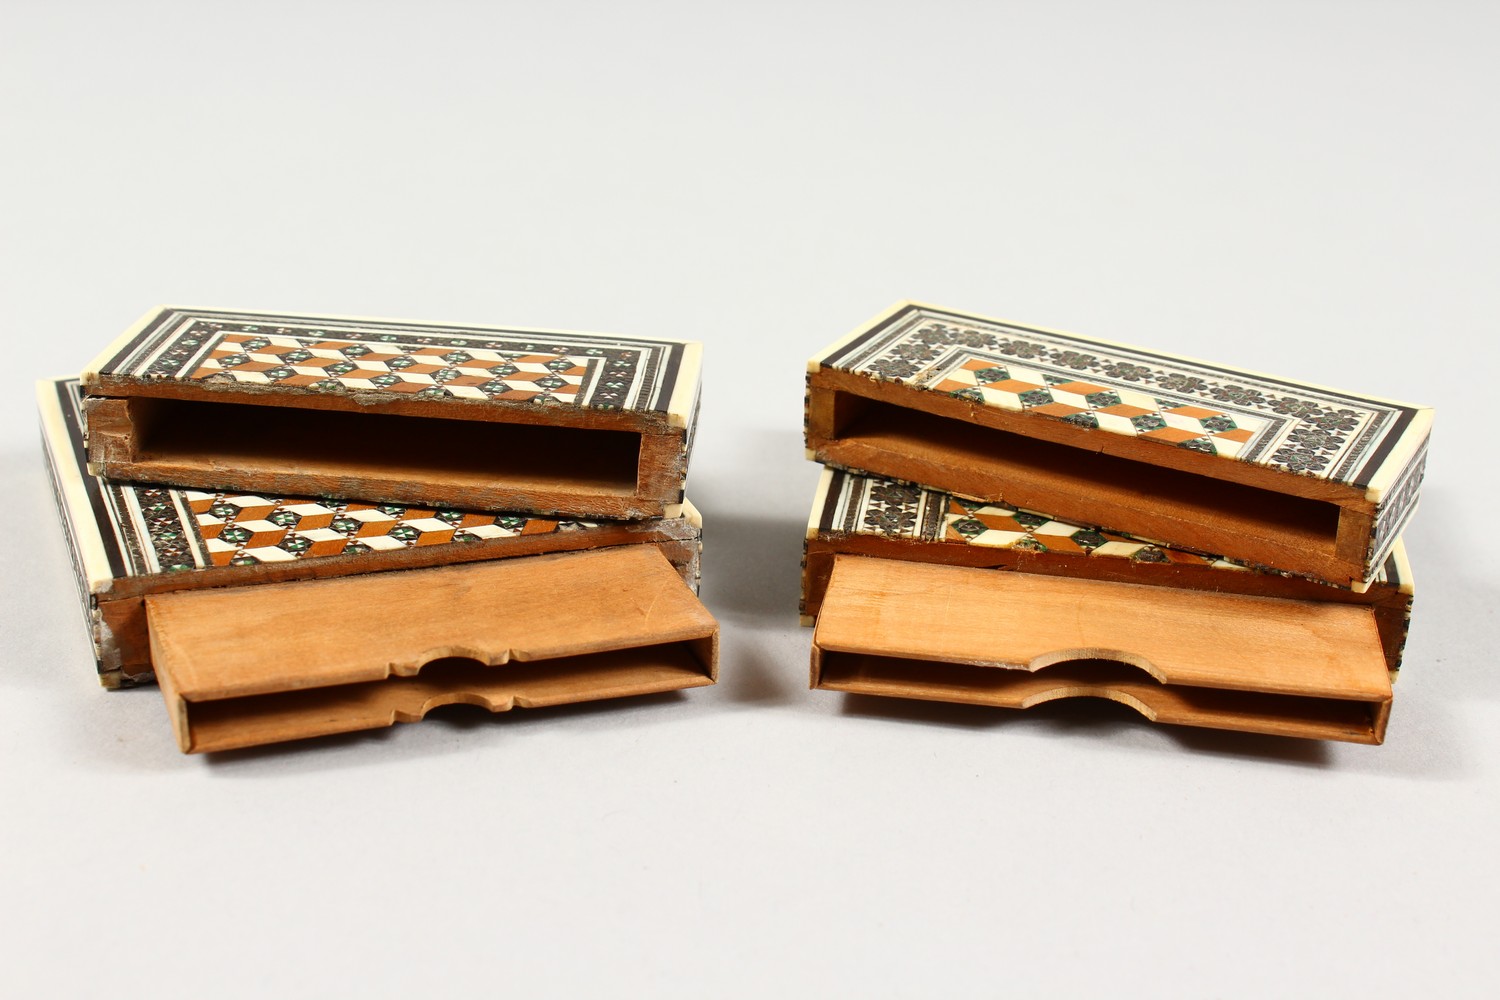 TWO EASTERN INLAID SANDALWOOD CARD CASES. 4ins x 3ins. - Image 3 of 3